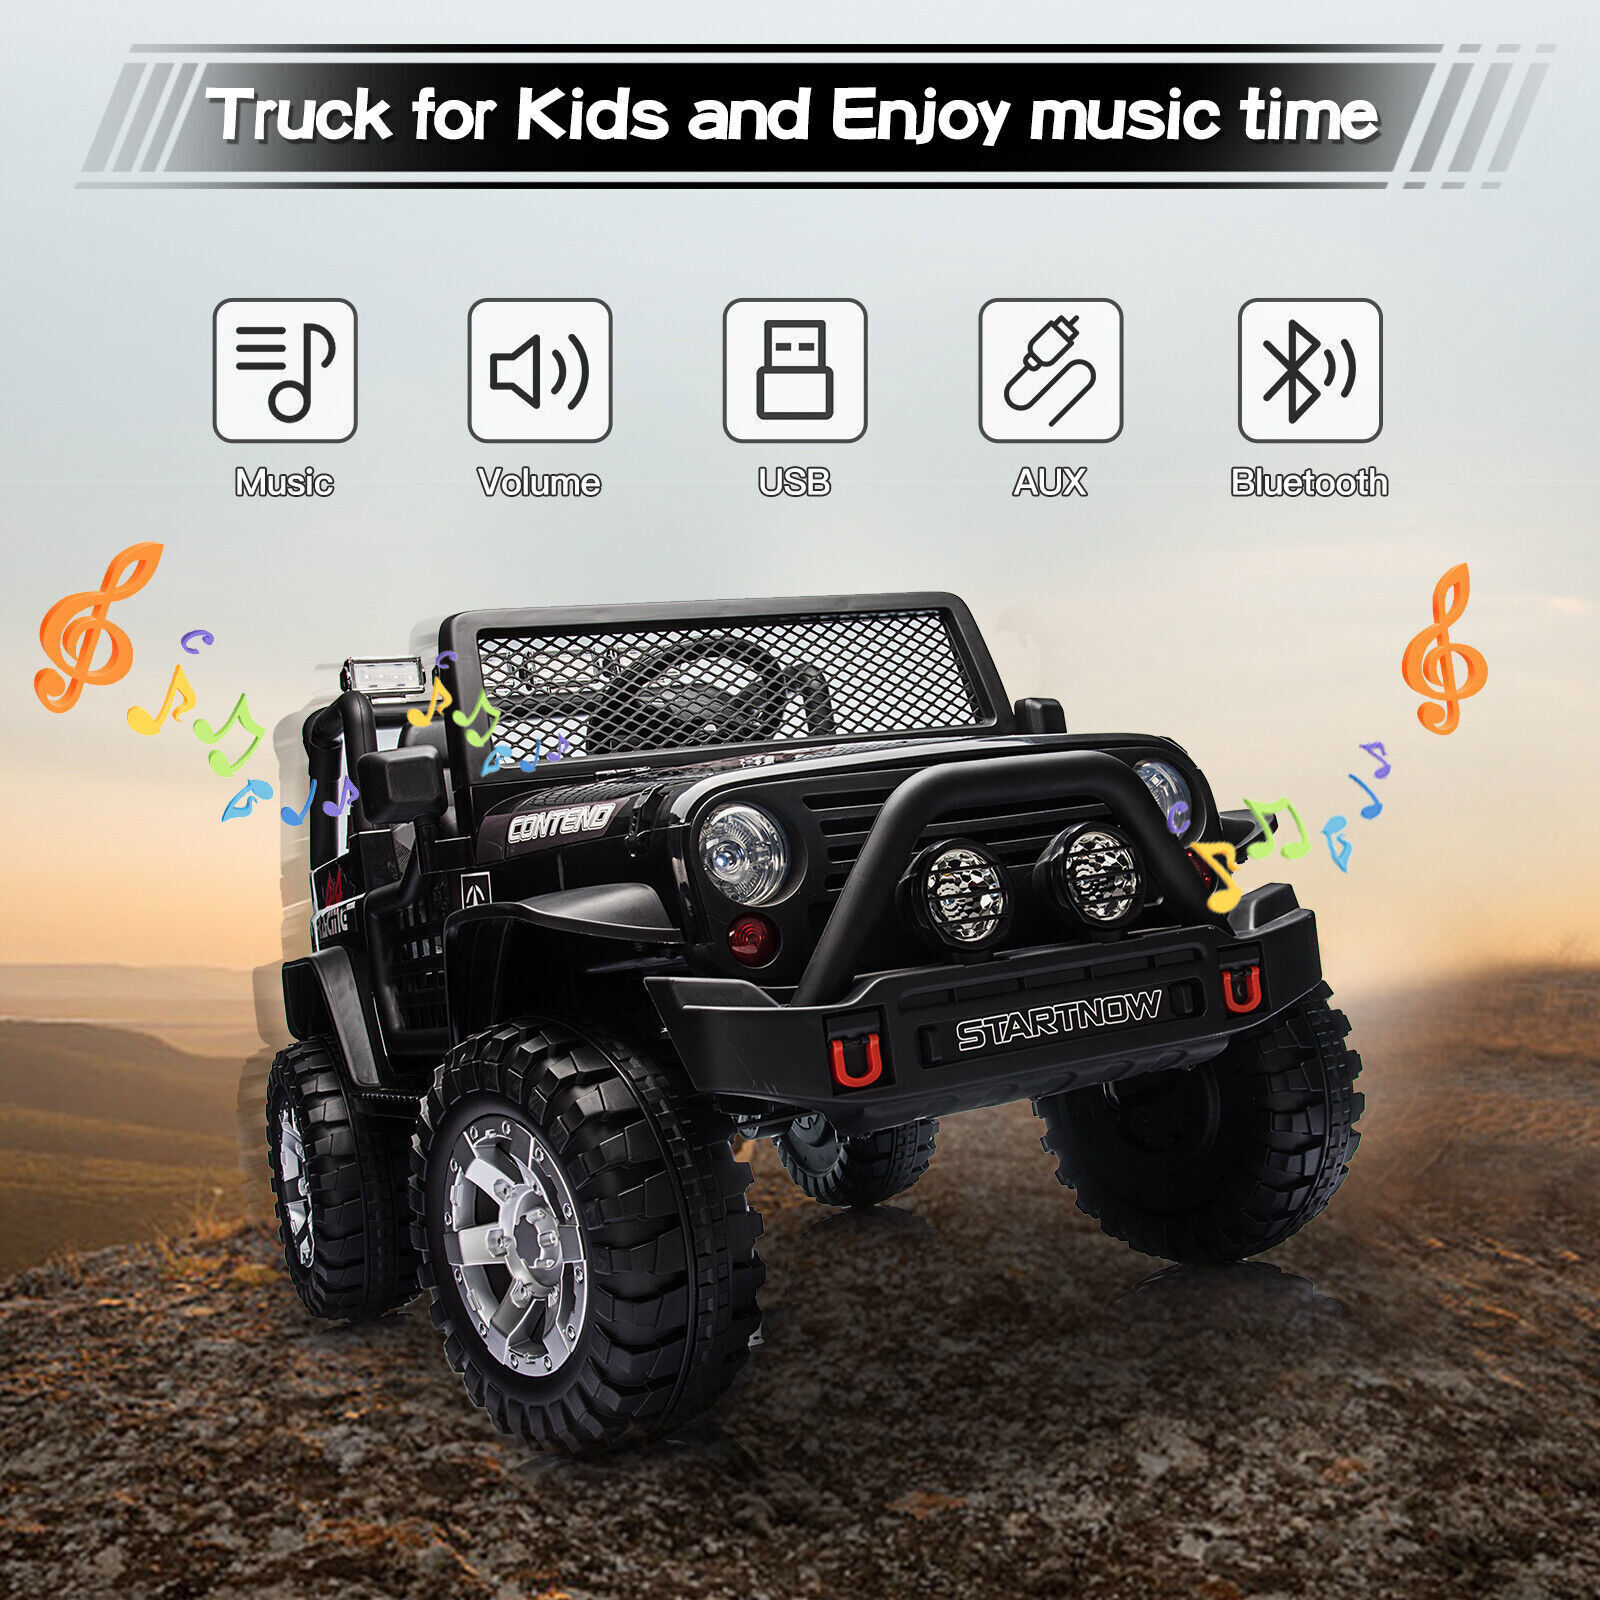 Dazone 12V Kids Ride on Jeep Car, Electric 2 Seats Off-road Jeep Ride on Truck Vehicle with Remote Control, LED Lights, MP3 Music, Black - image 2 of 8